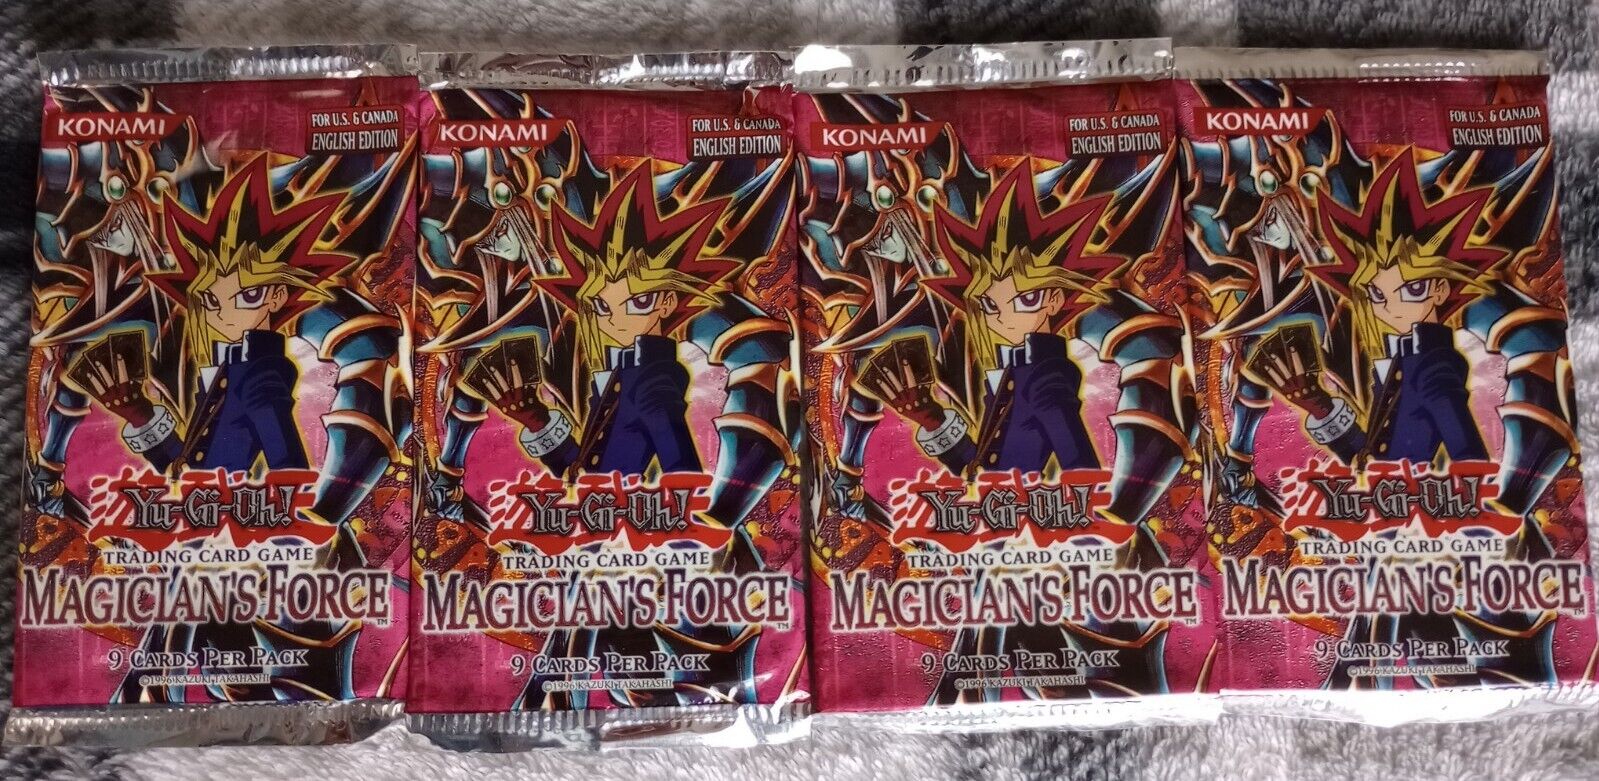 Yugioh - 1x Magician's Force - Original Unlimited Empty Opened Booster Pack 